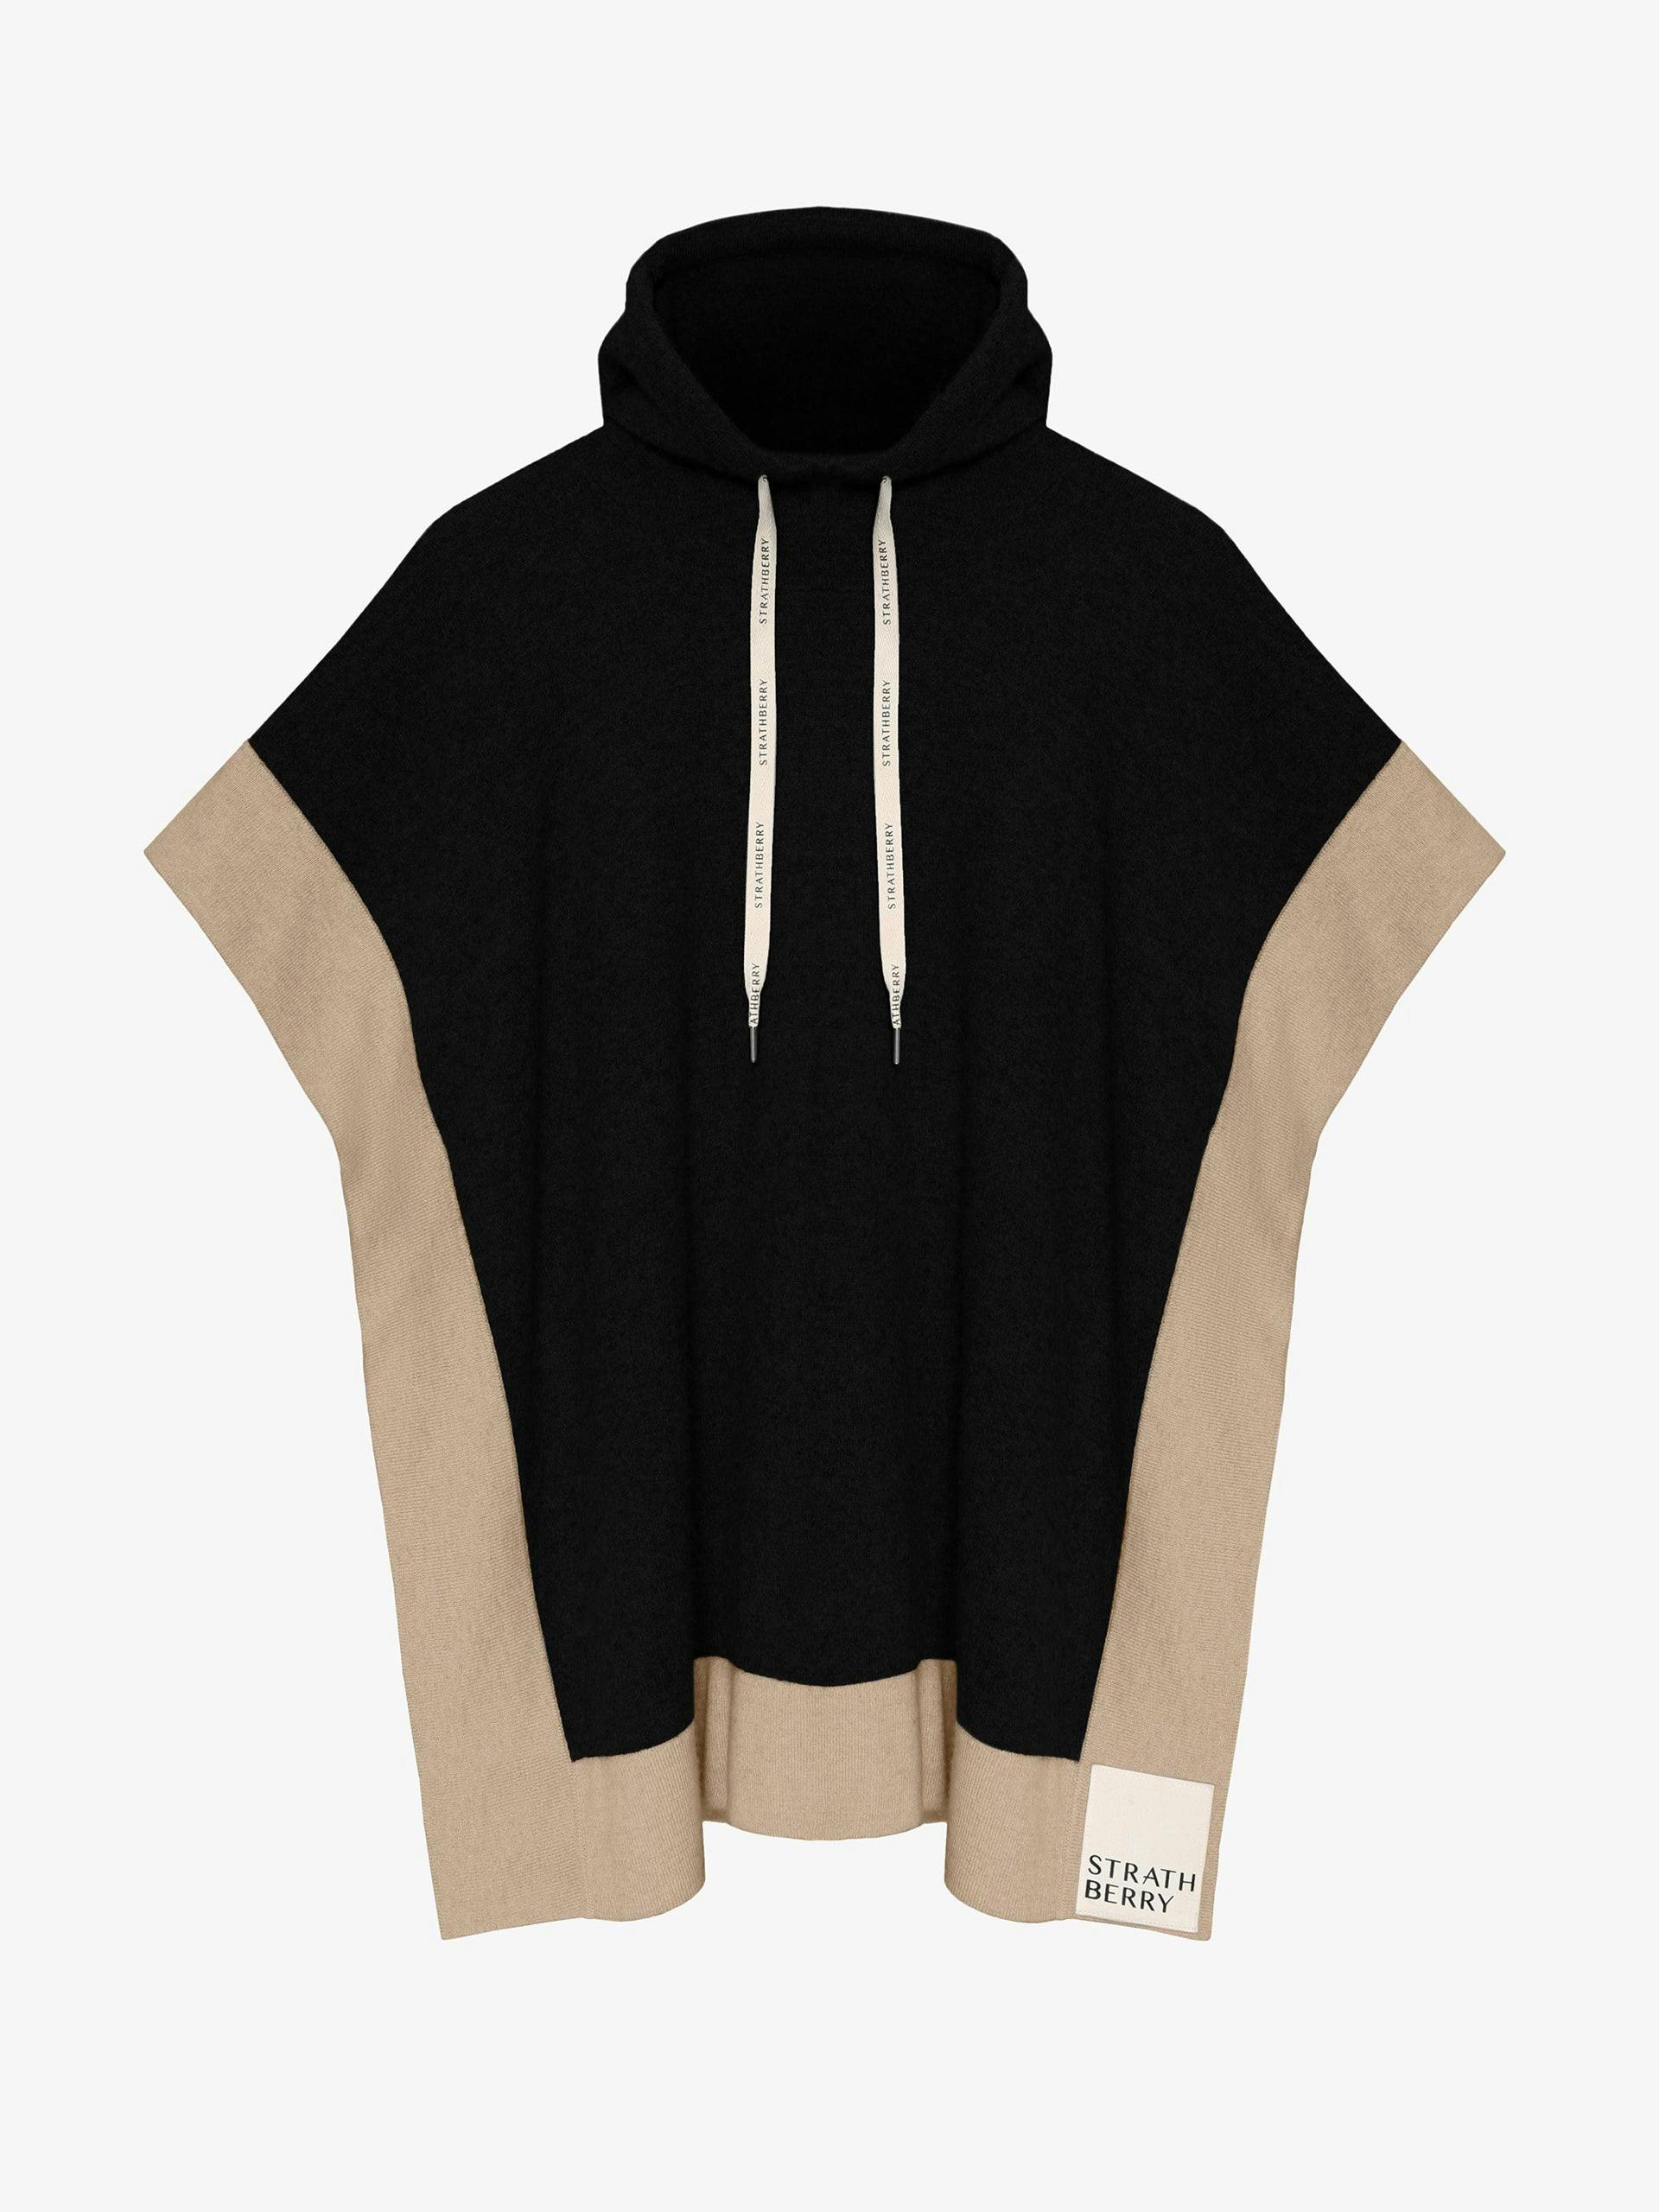 Black and camel cashmere poncho with hood